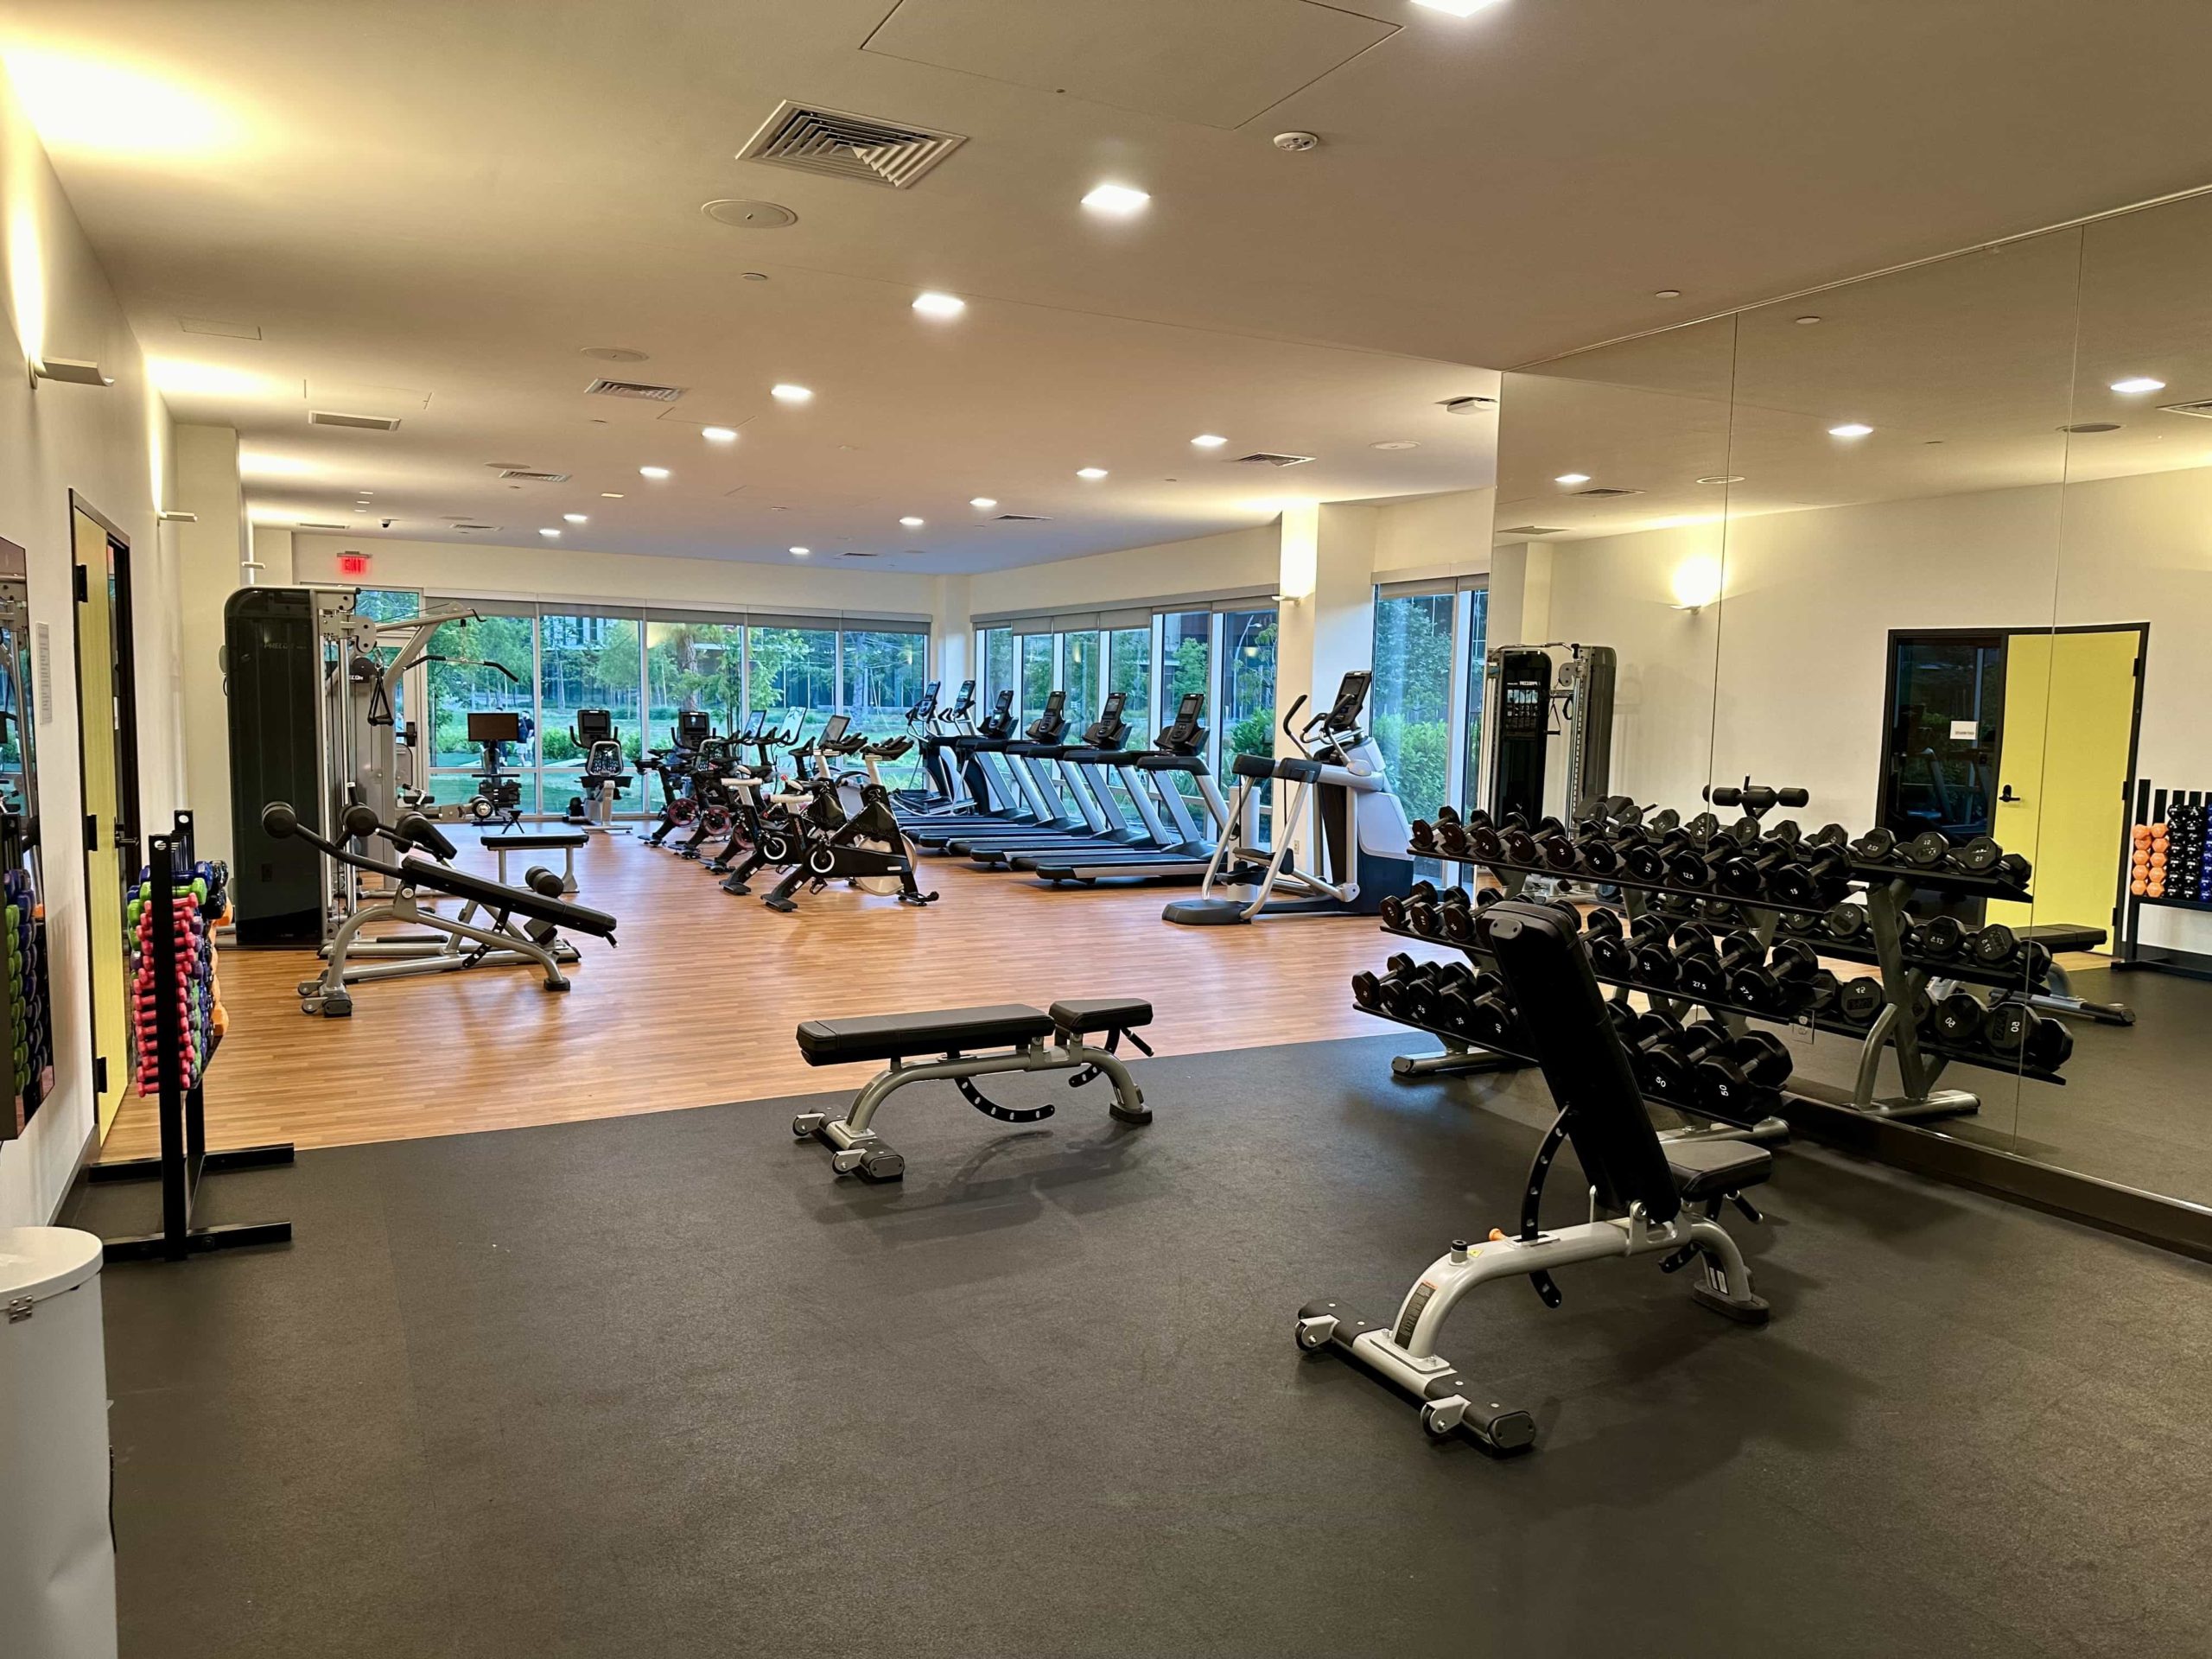 Dumbells, benches, and exercise mats within a fitness centre